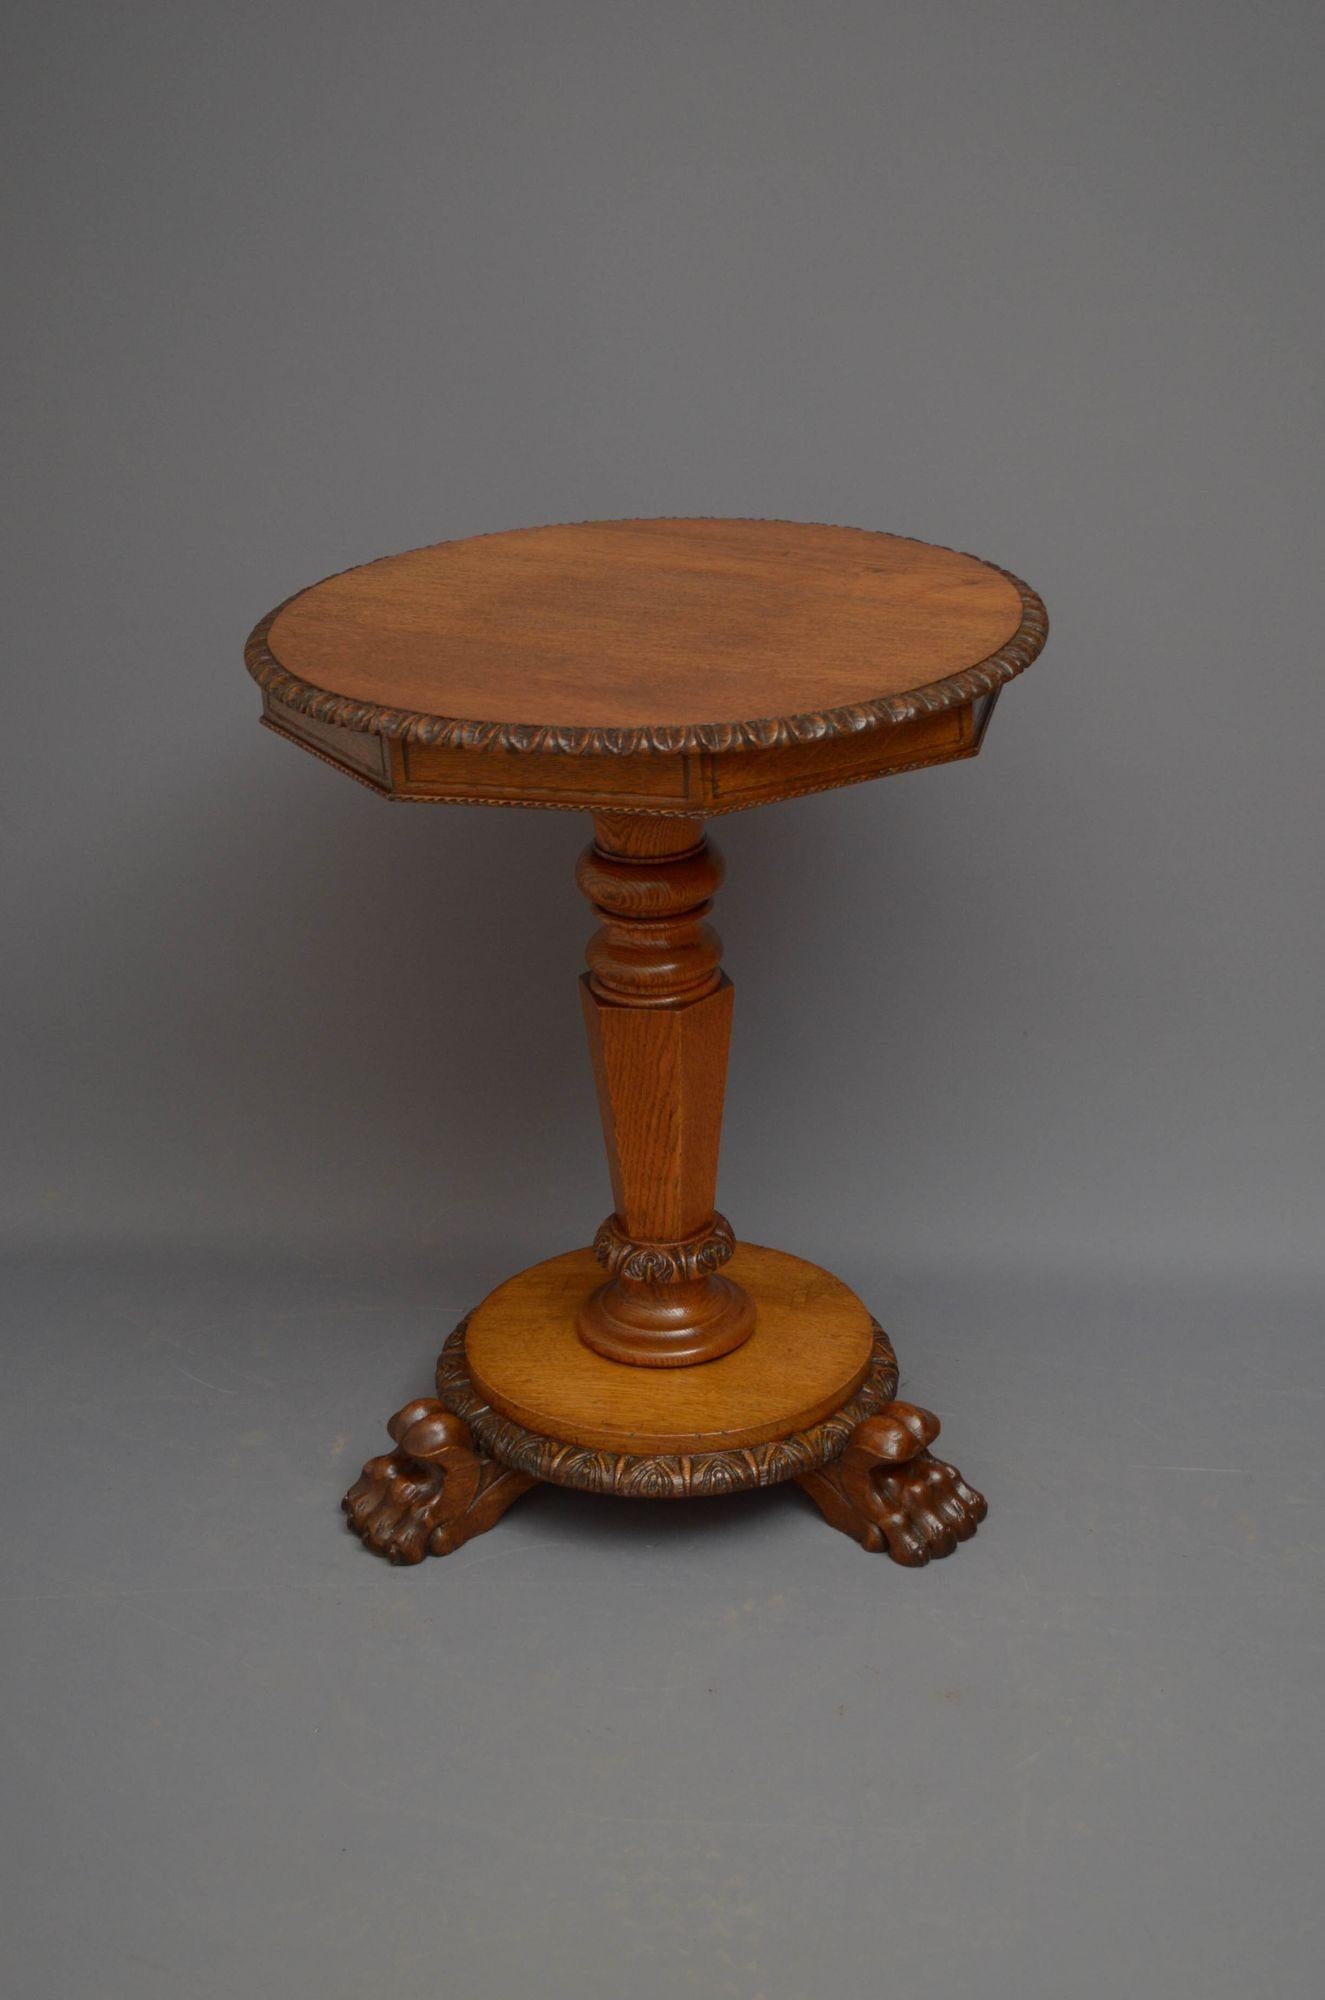 A03 Unusual Victorian pedestal table in oak, having octagonal top with carved edge, standing on turned and flat faceted column terminating in circular base with carved decoration and three paw feet. This antique table is in home ready condition.